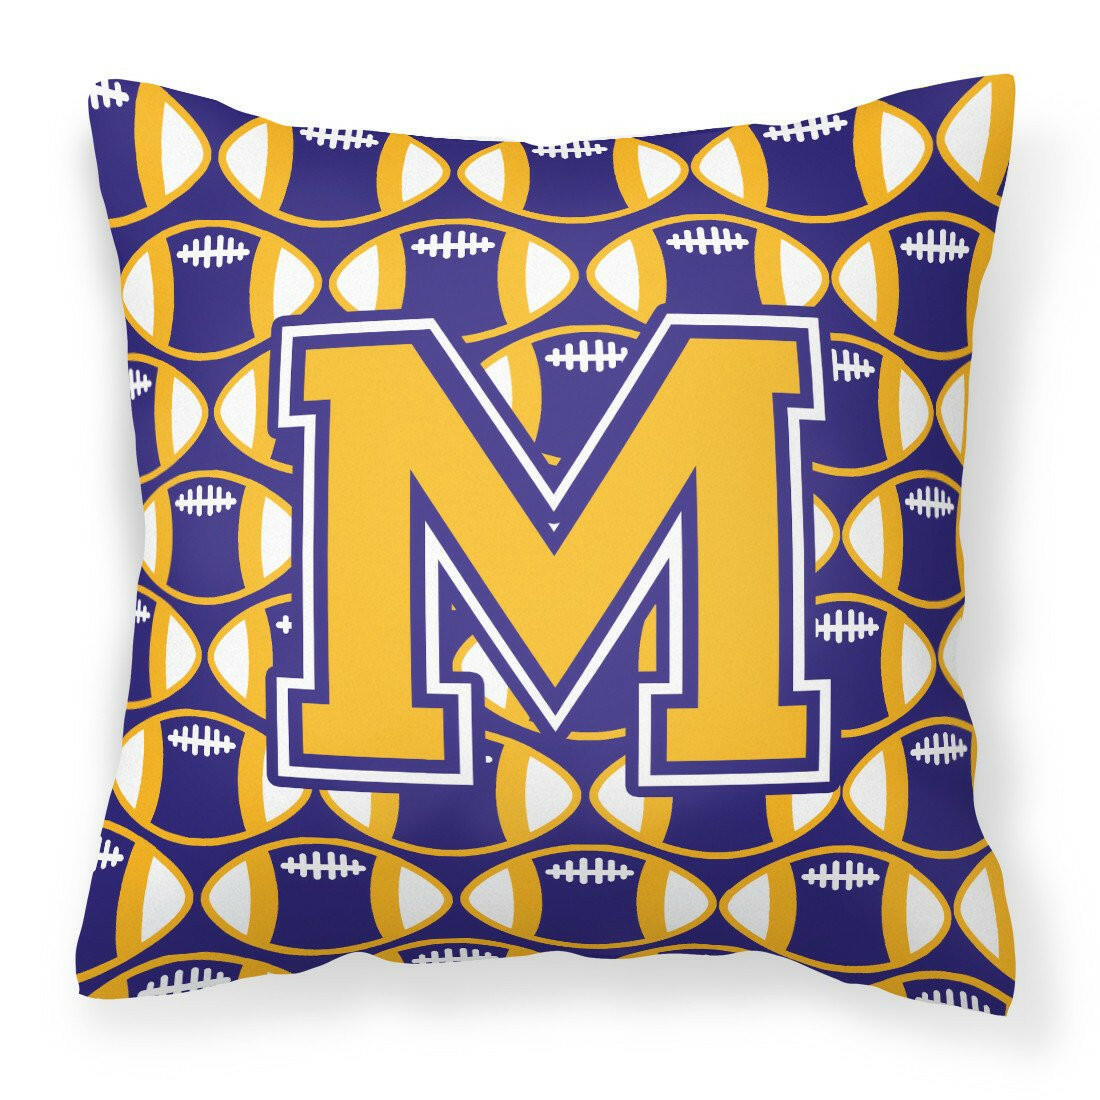 Letter M Football Purple and Gold Fabric Decorative Pillow CJ1064-MPW1414 by Caroline's Treasures